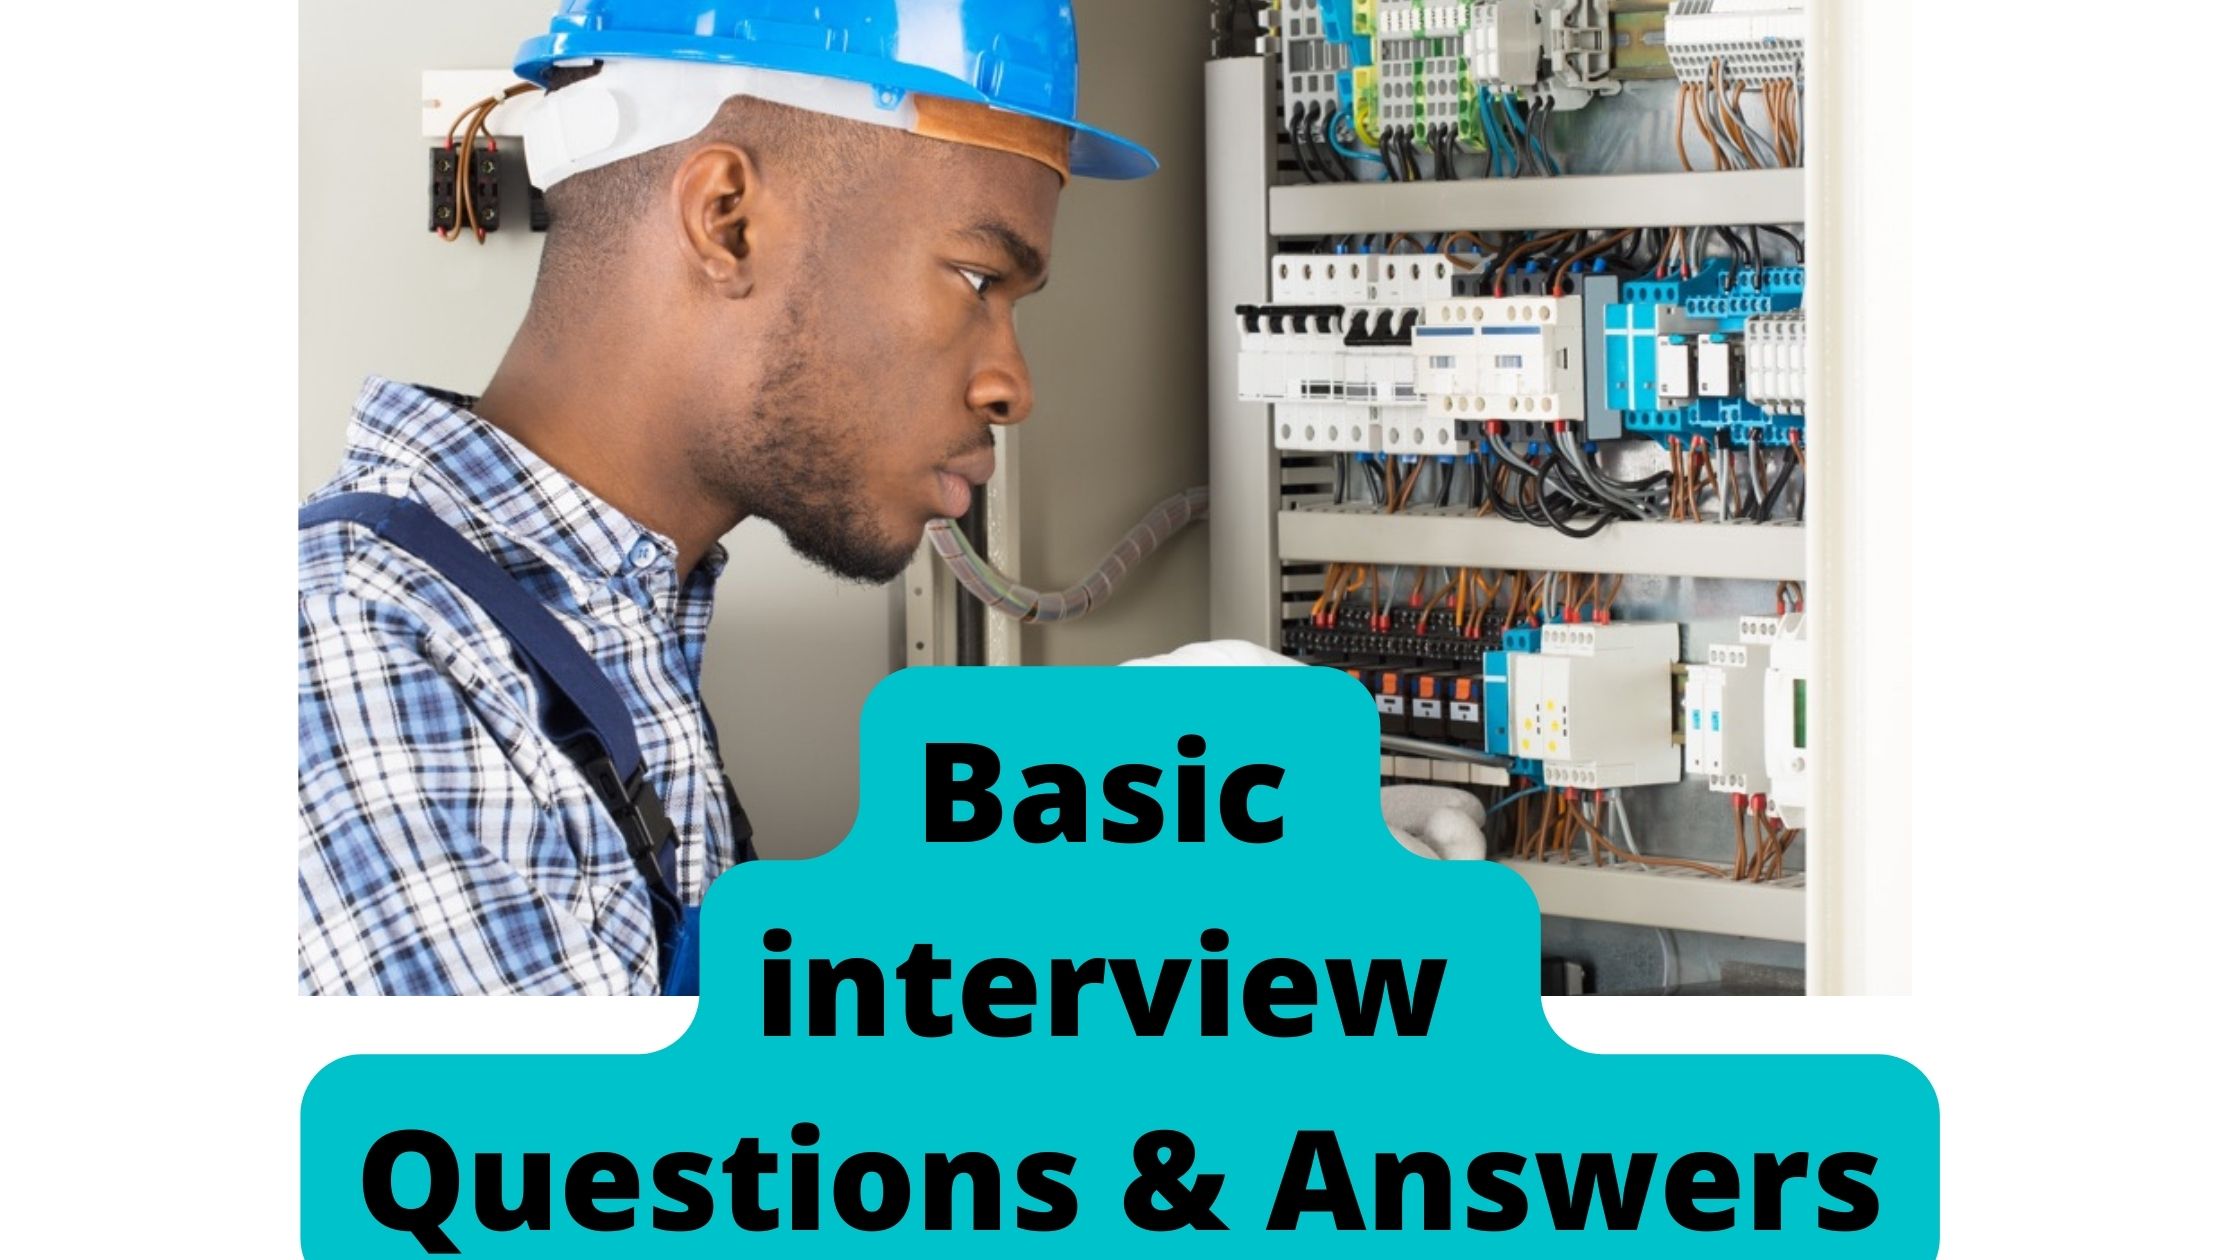 Basic interview Questions & Answers